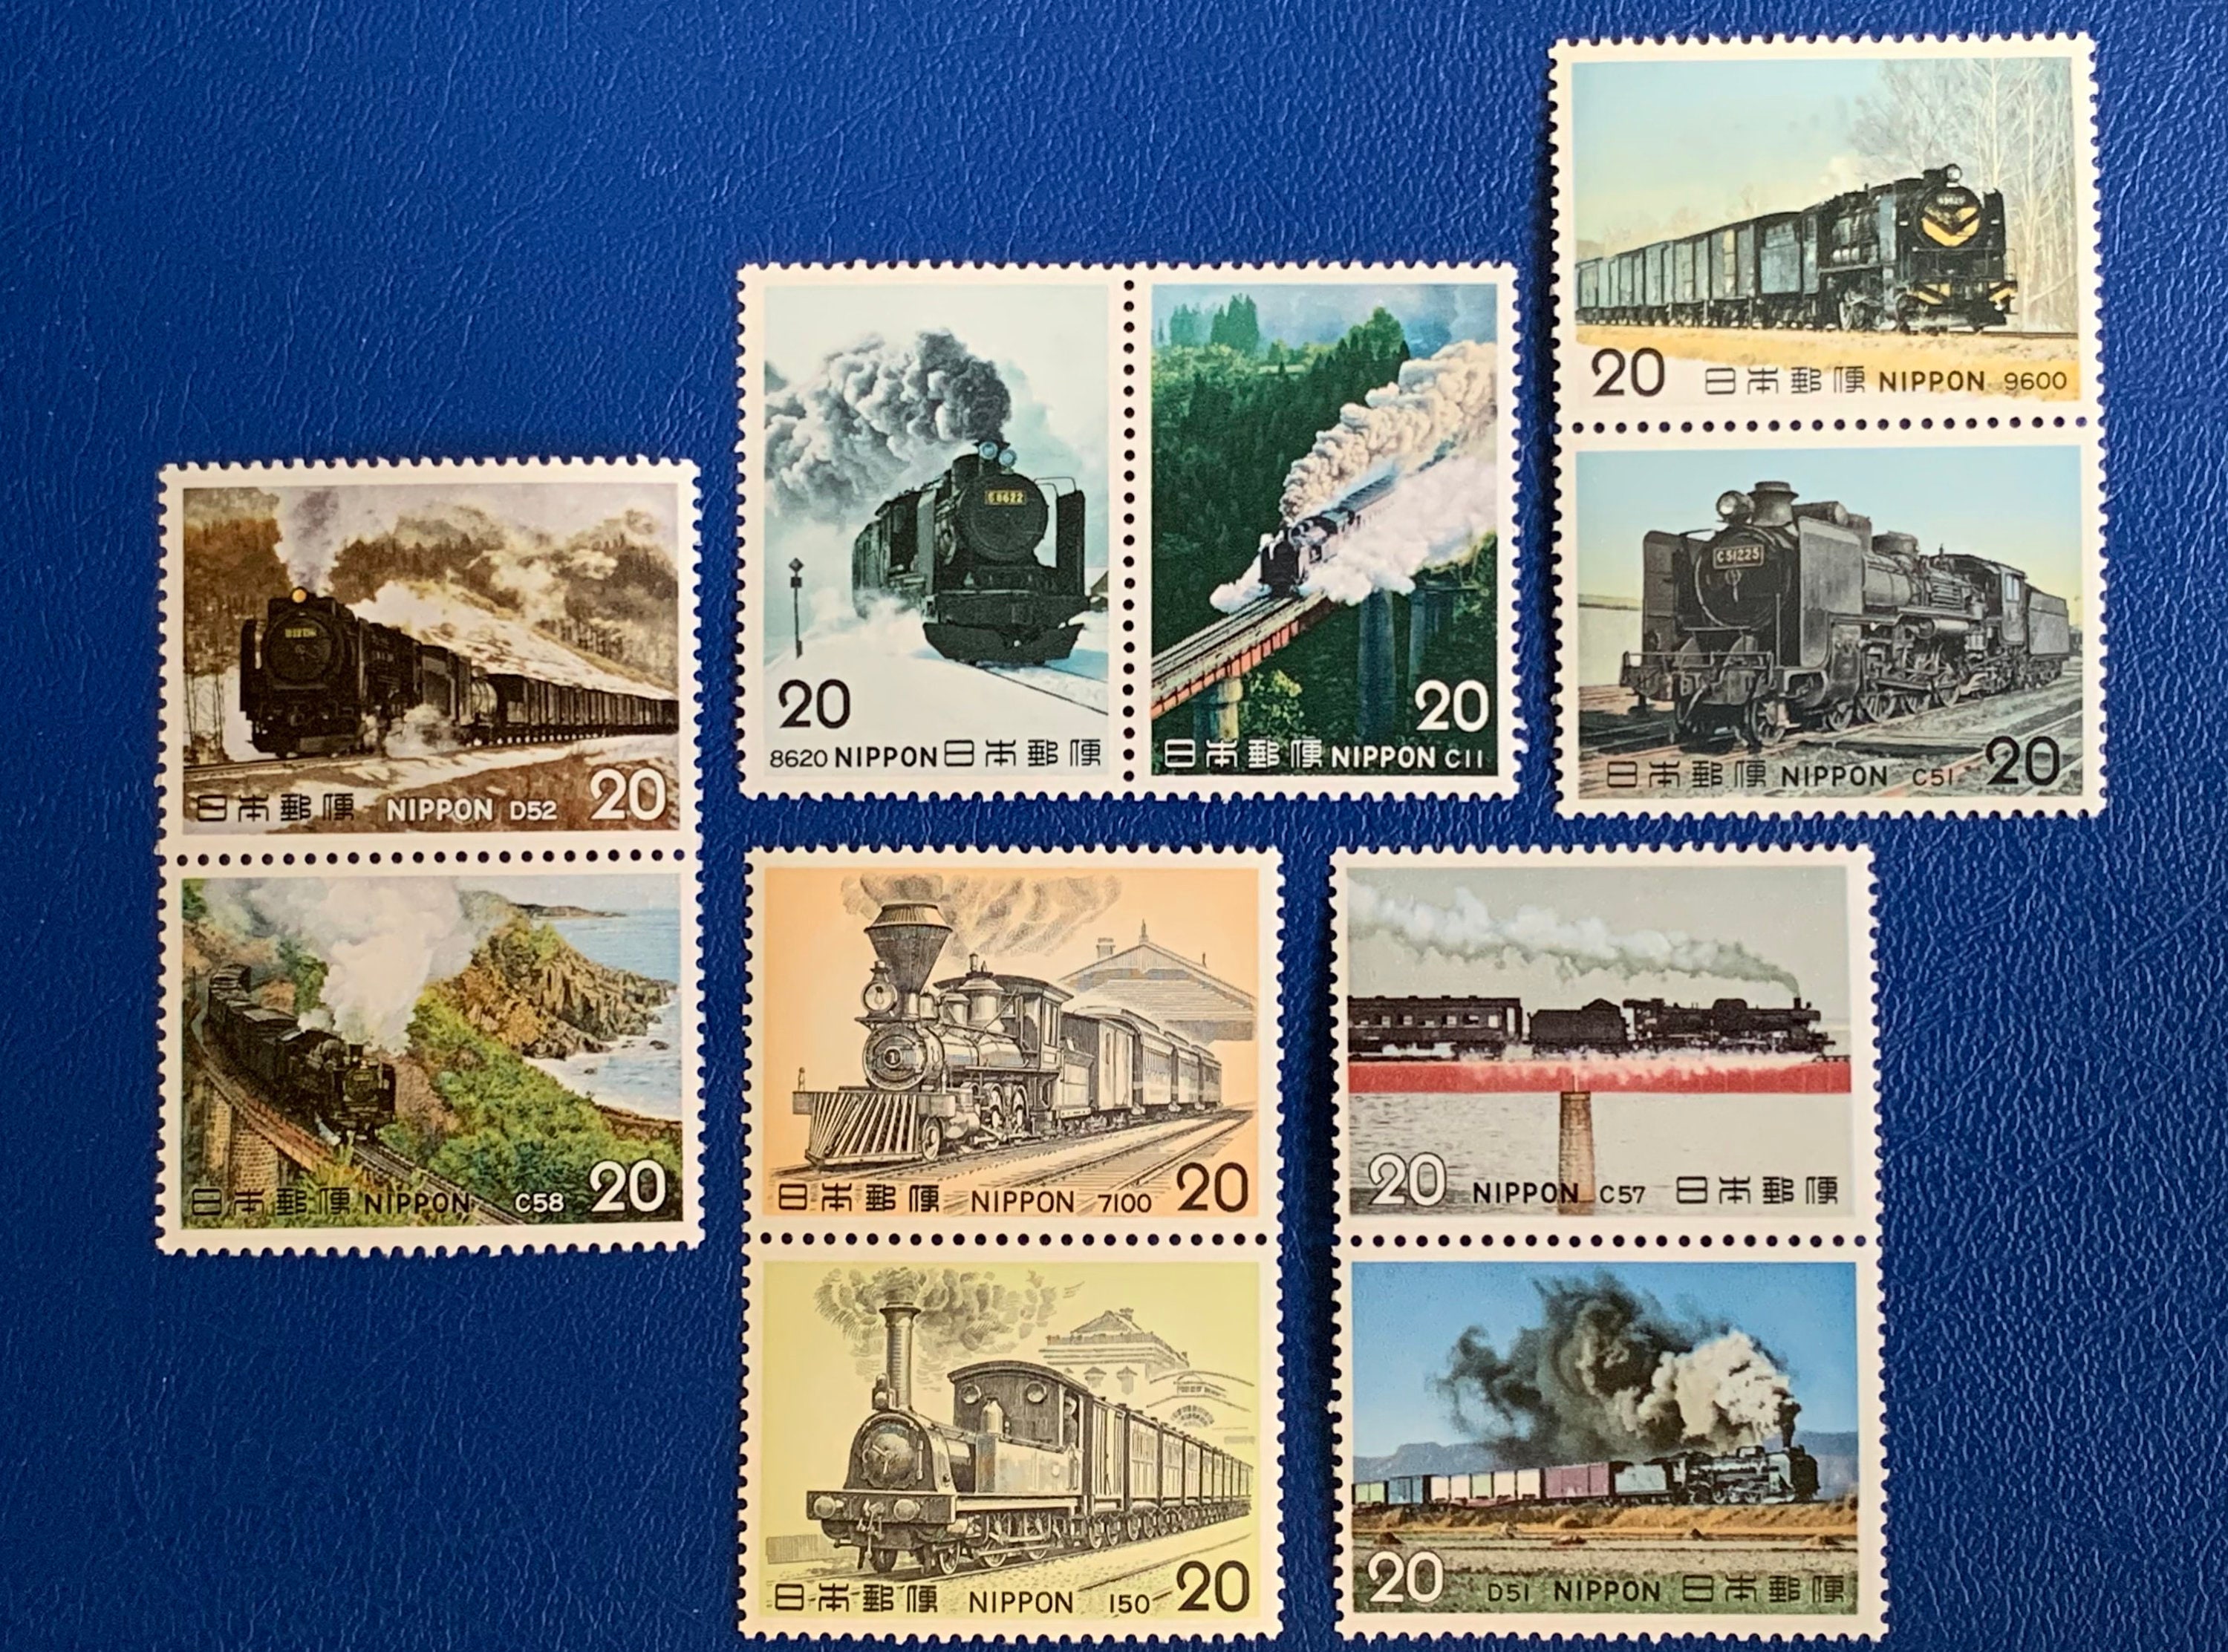 Finding and collecting Japanese Railway station stamps